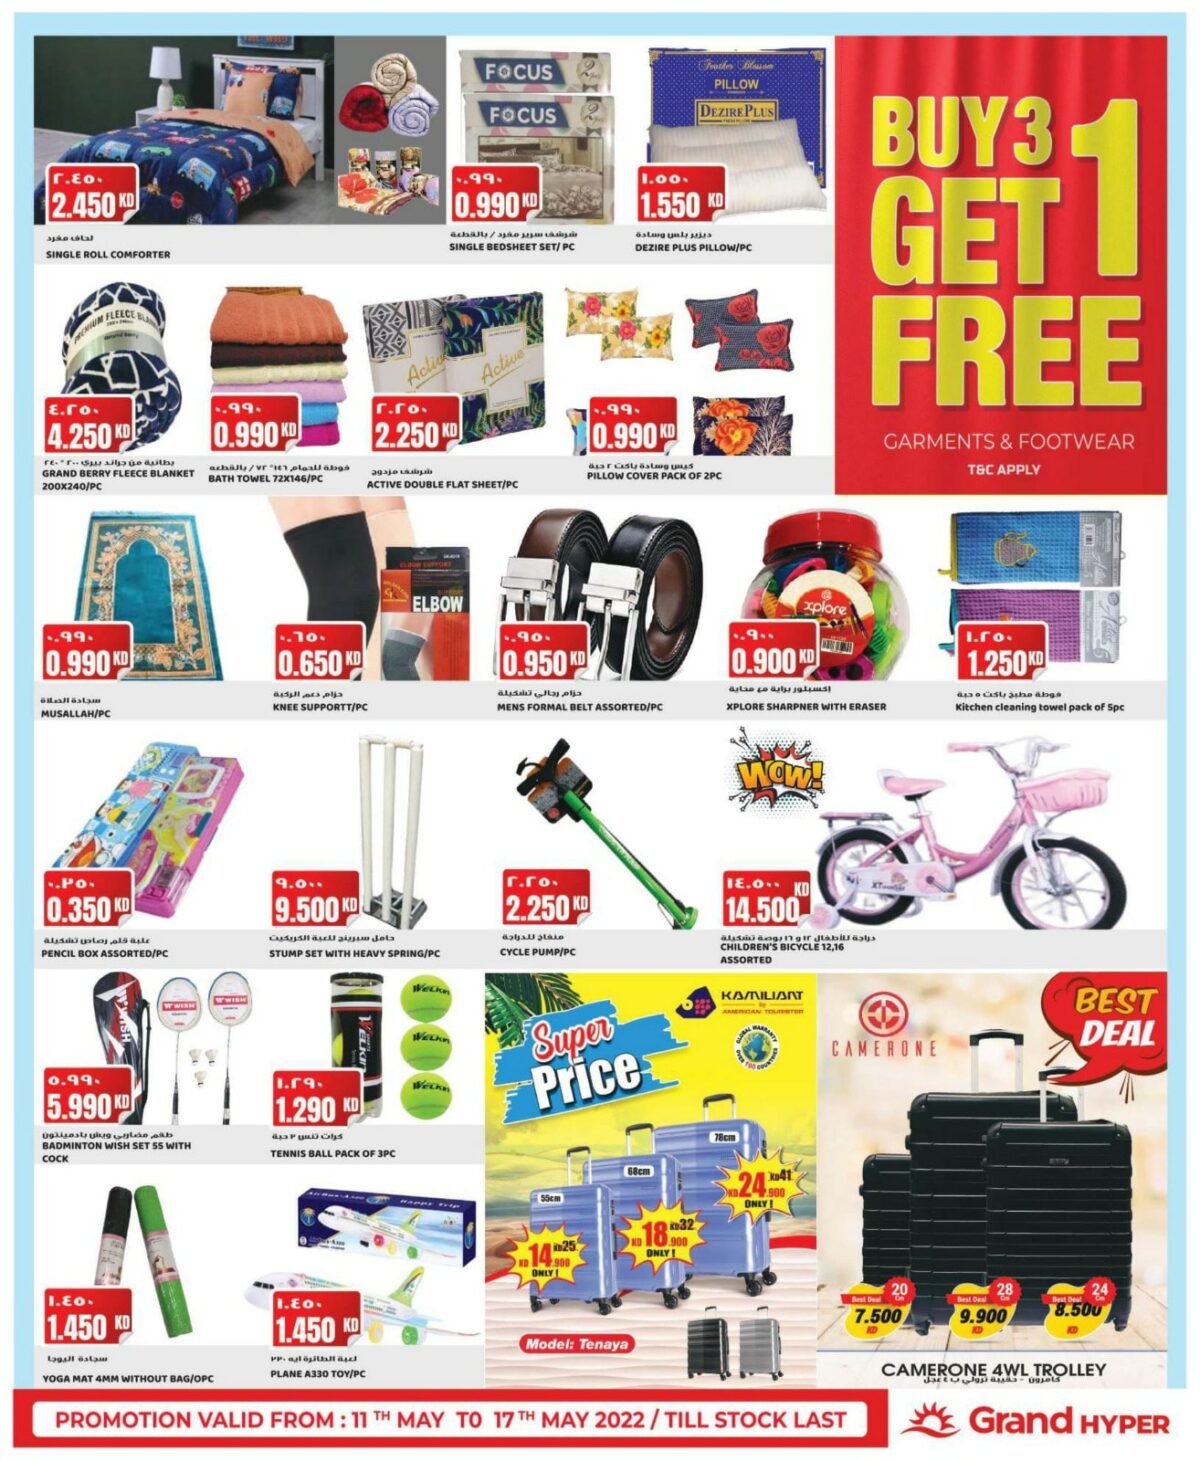 Grand Hypermarket Special Offers, iiQ8 weekly promotions 2